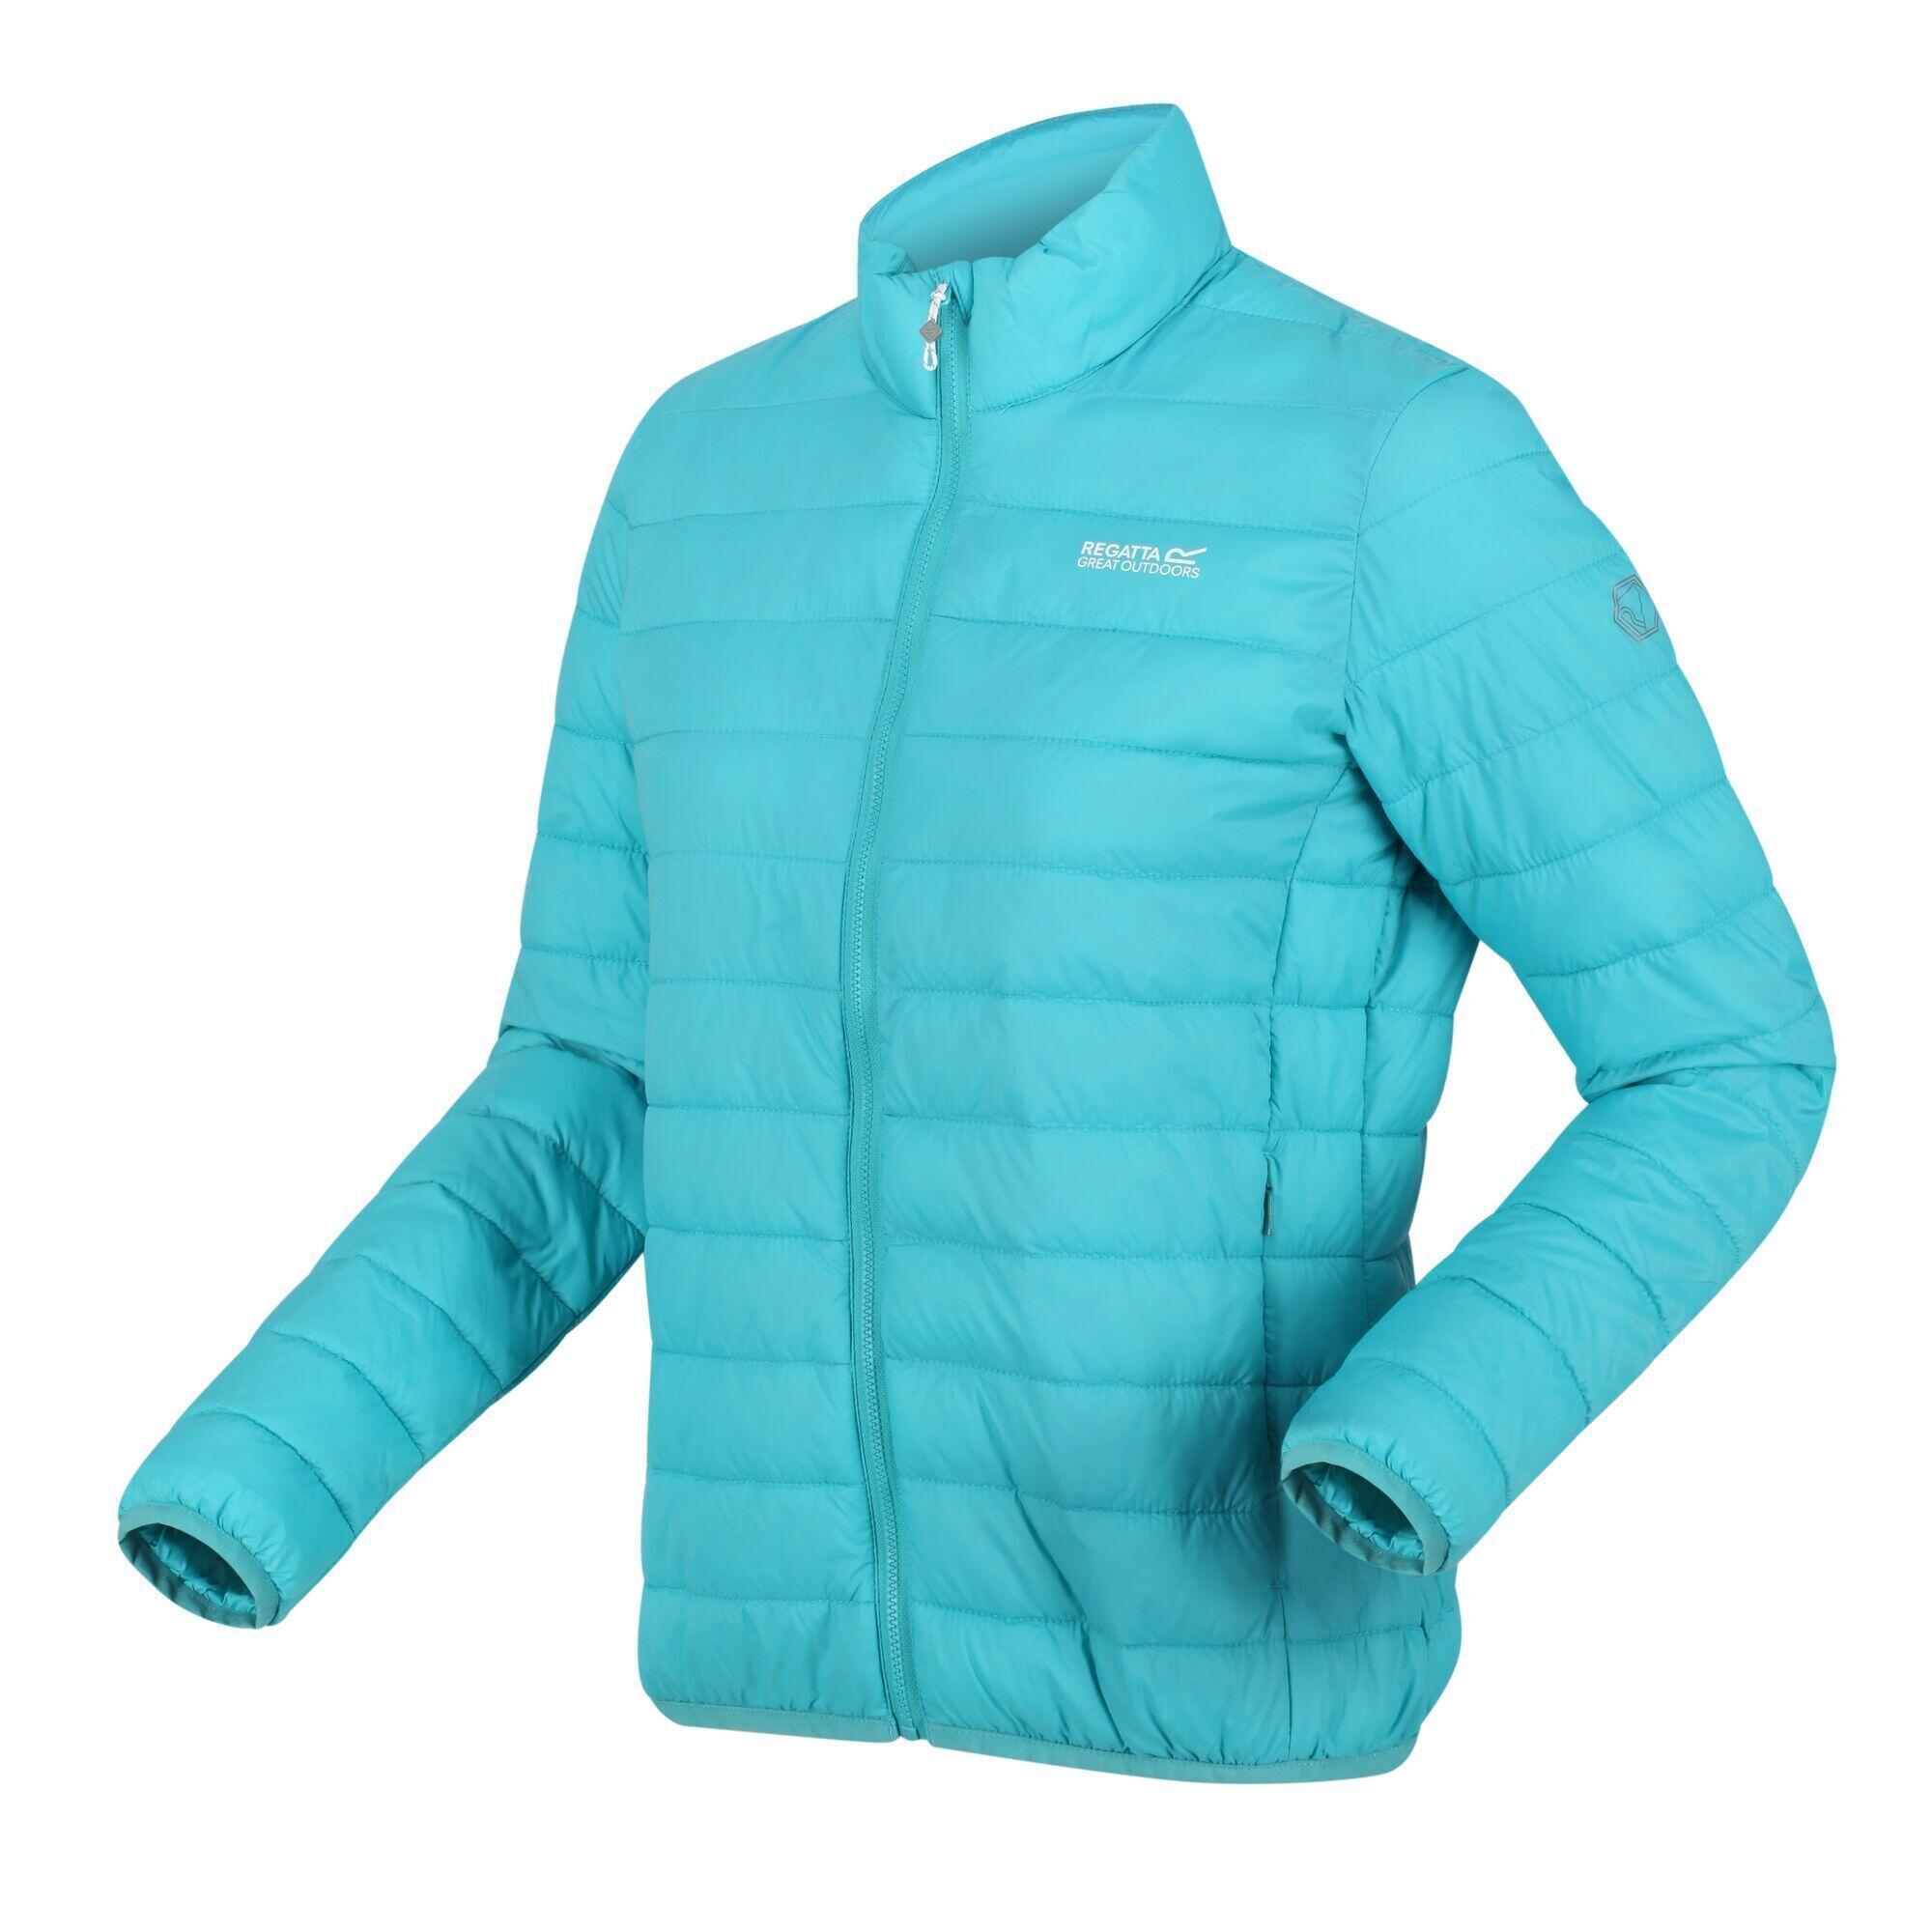 Womens/Ladies Hillpack Padded Jacket (Turquoise) 3/4